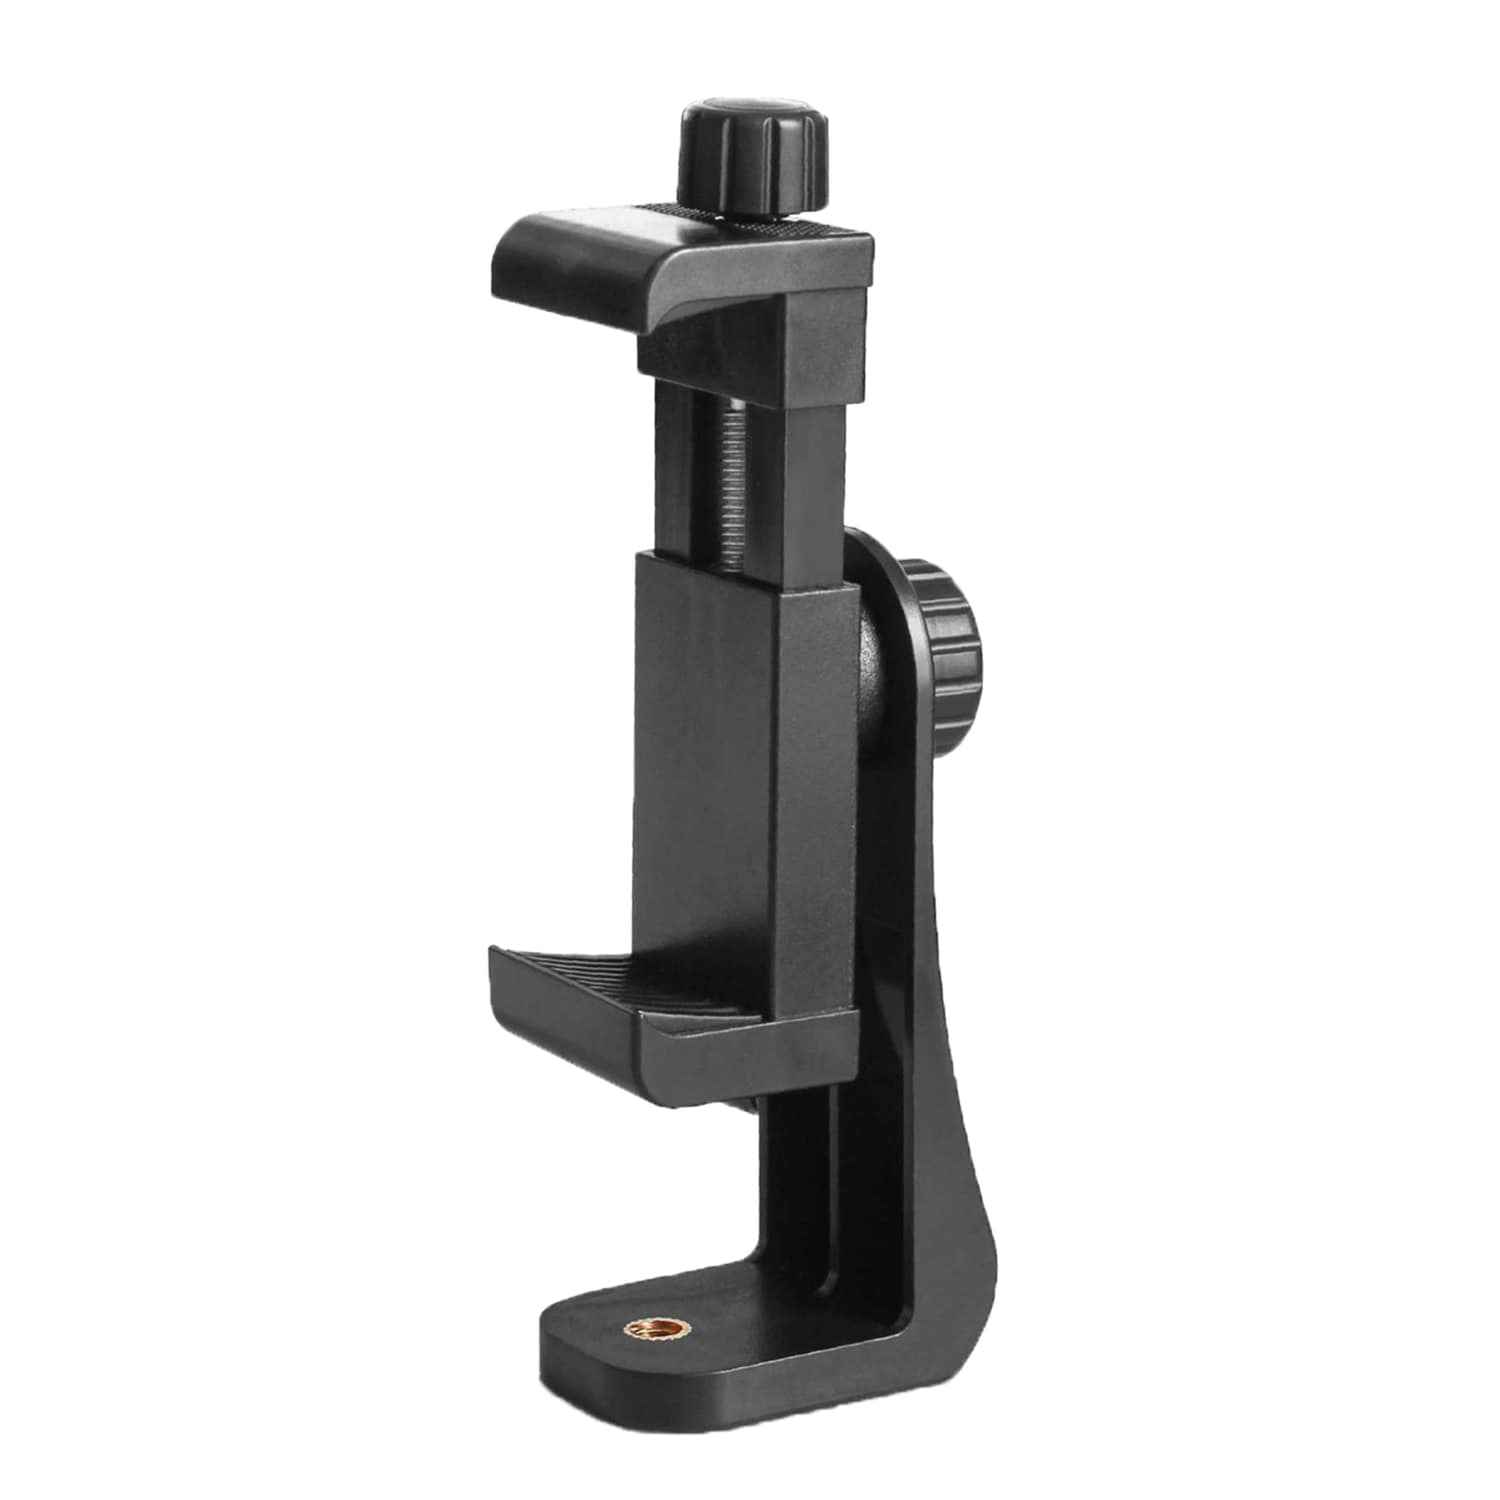 Bower 360° Rotating Smartphone Tripod Mount in Smartphone Camera Accessories department Lowes.com